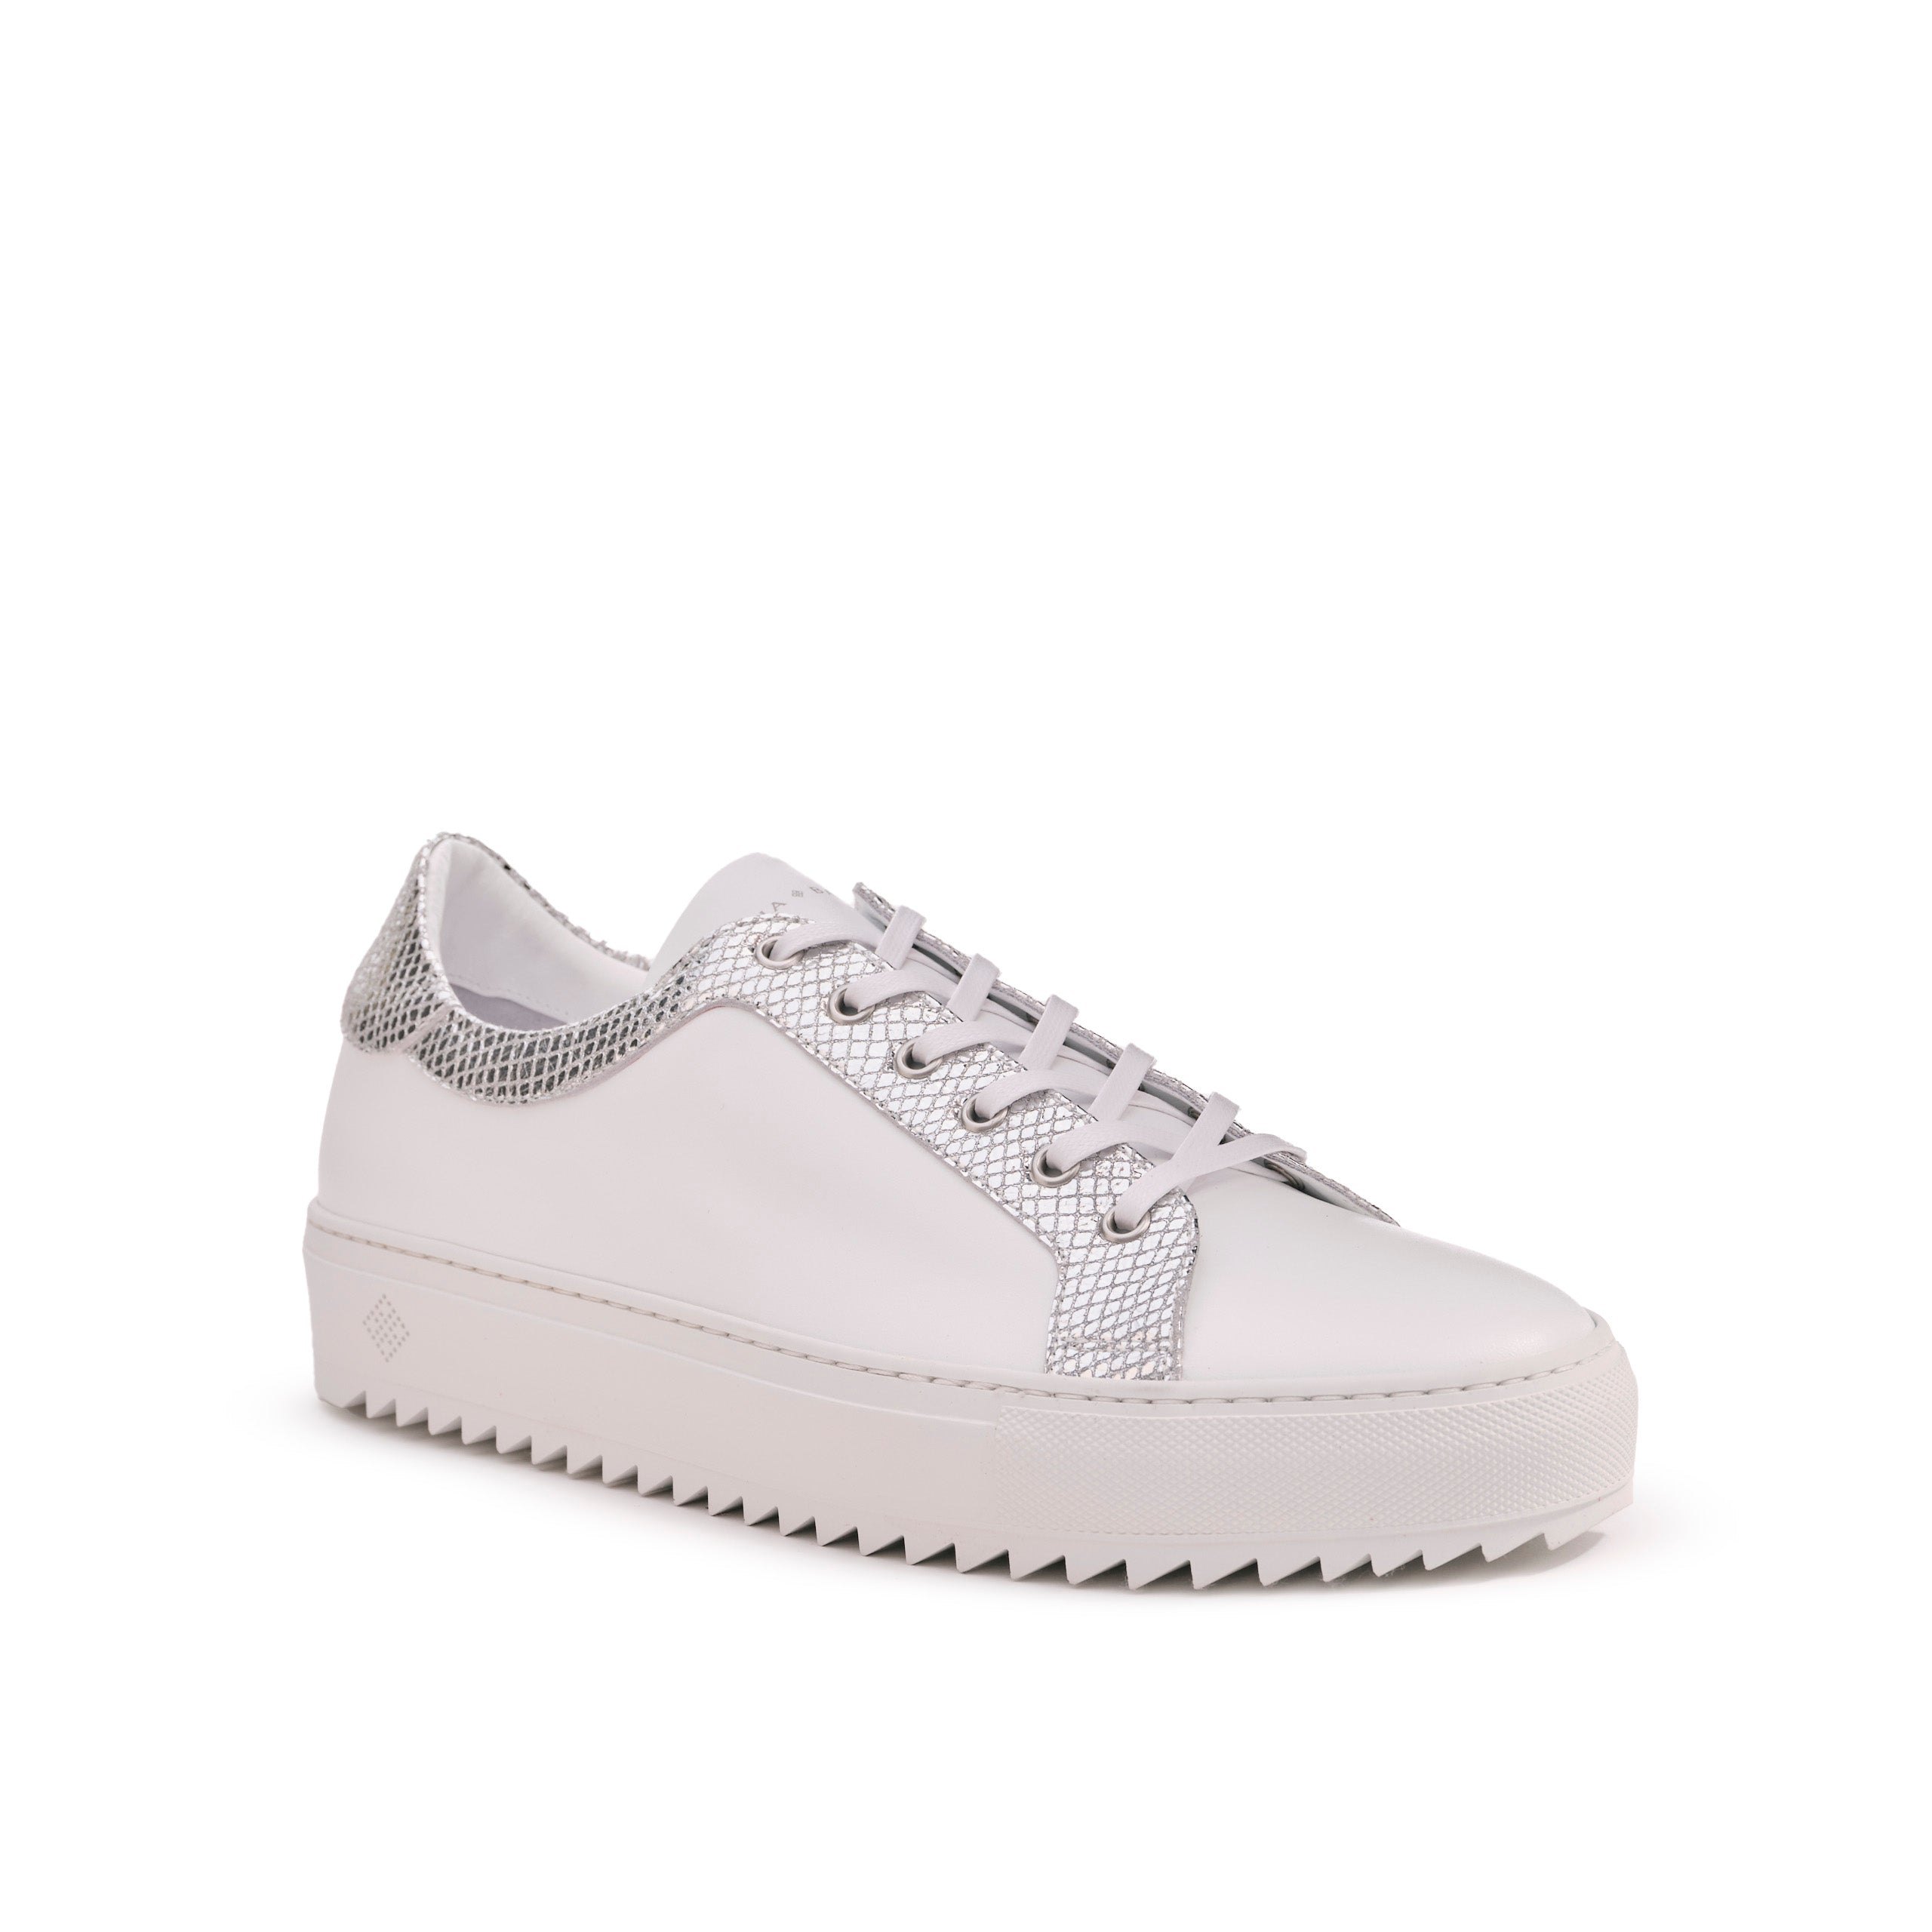 Men’s Billy Leather Low-Top Alabaster White Sneaker - Tiannia Barnes